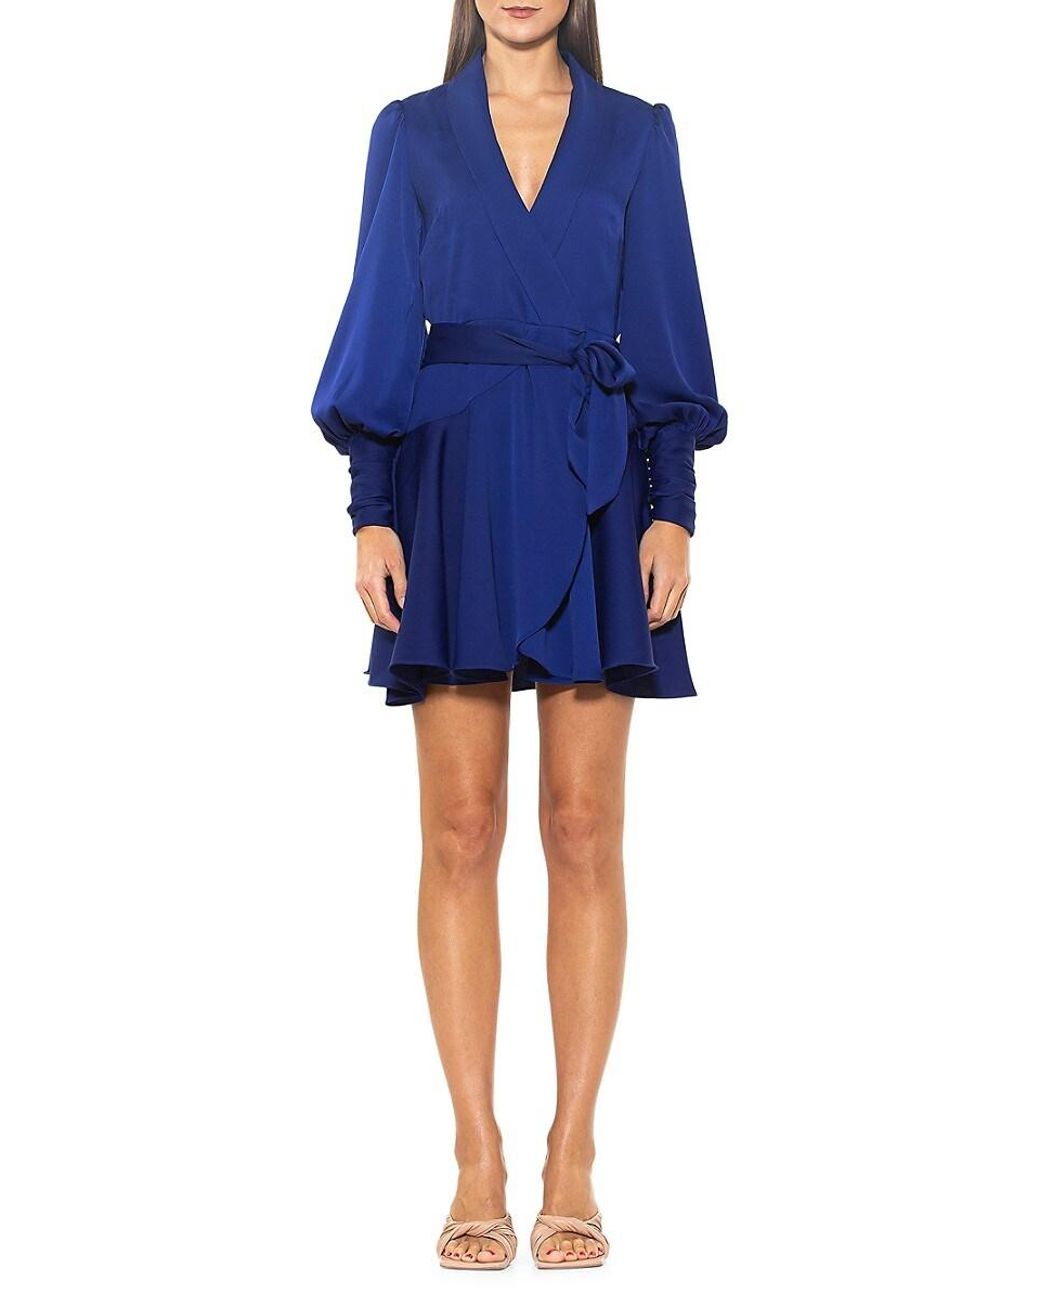 Alexia Admor Synthetic Phoebe Wrap Dress in Blue | Lyst